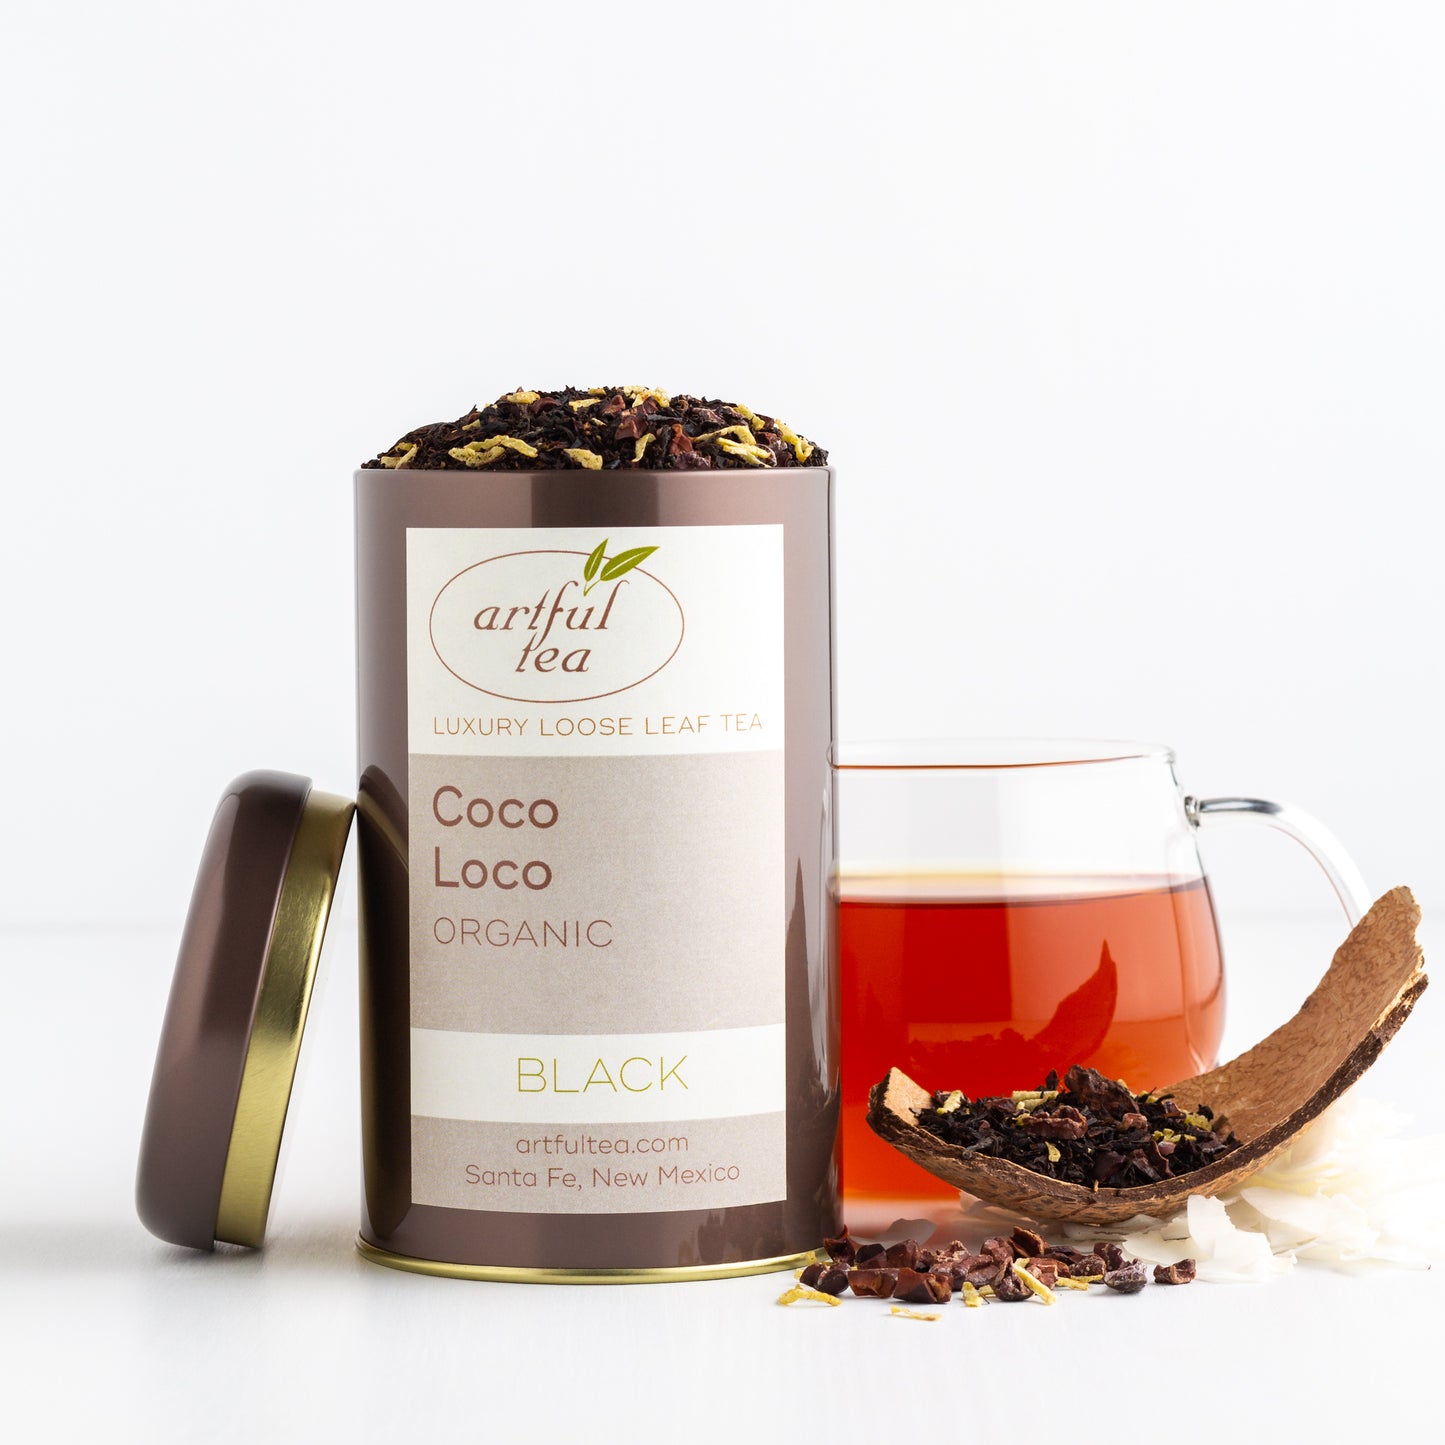 Coco Loco Organic Black Tea shown packaged in a brown tin with the lid off, with a glass mug of brewed tea in the background, some chocolate pieces and a piece of coconut nearby